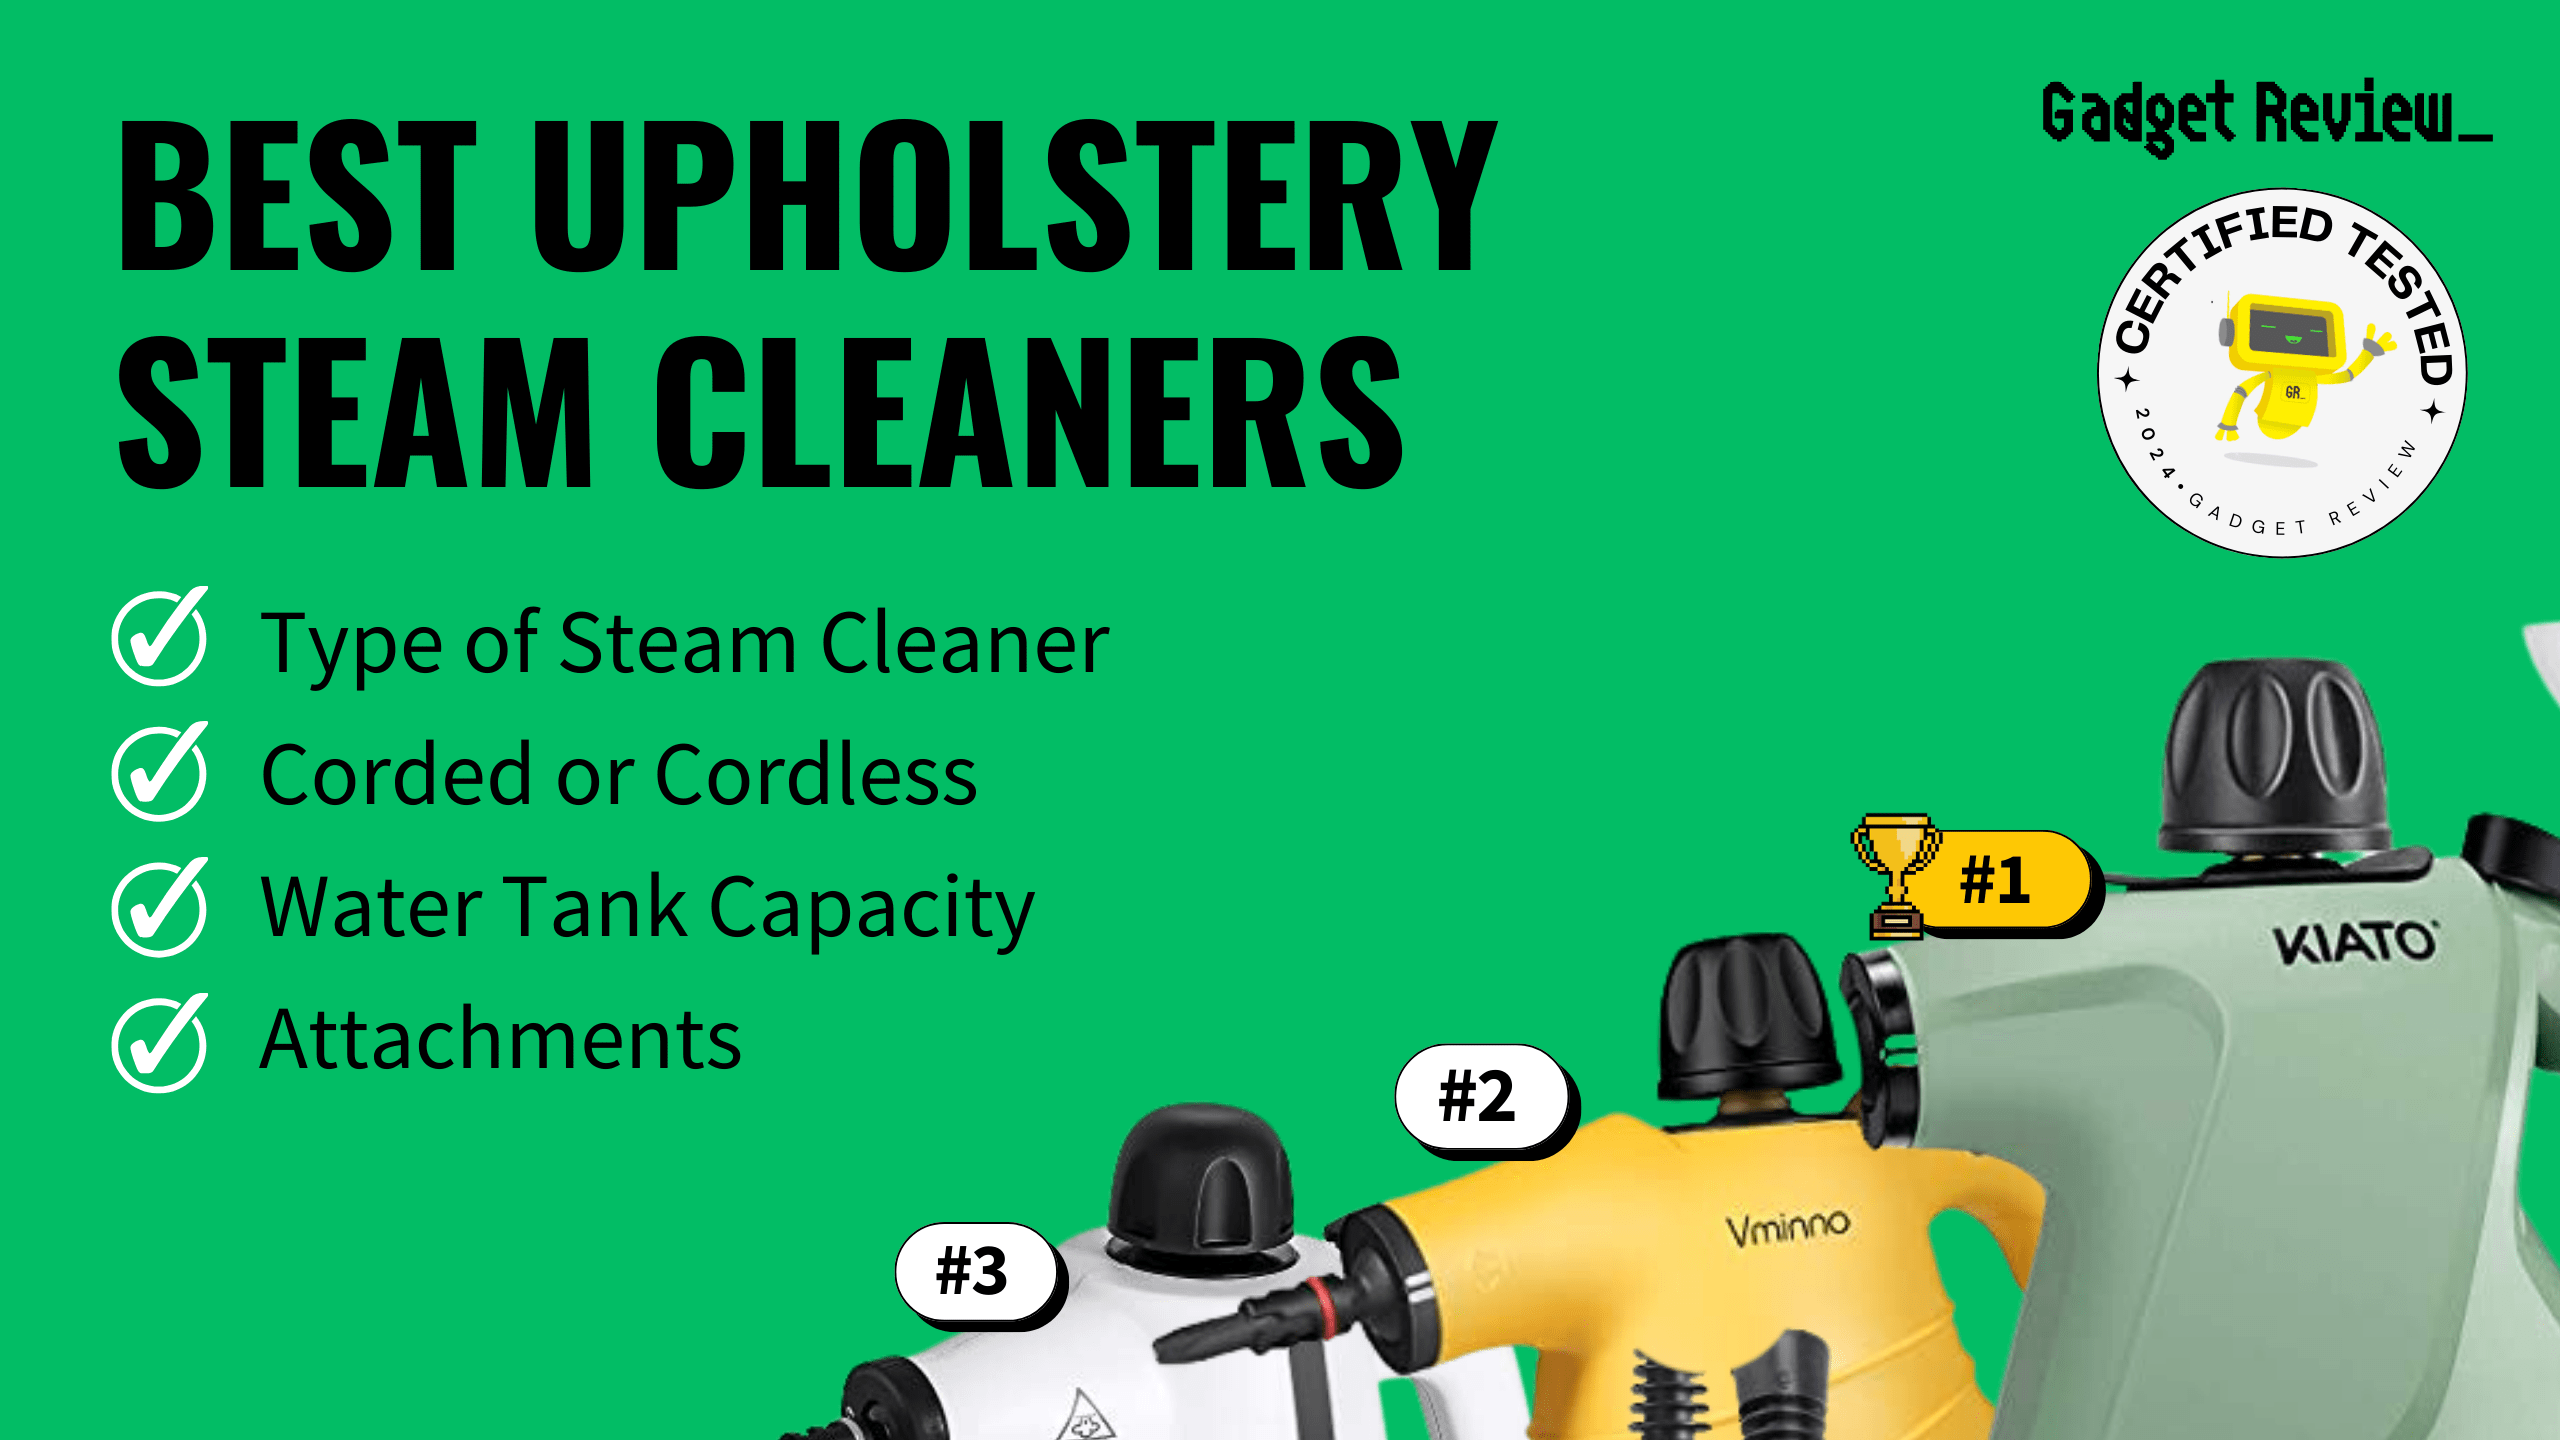 best upholstery steam cleaner guide that shows the top best vacuum cleaner model